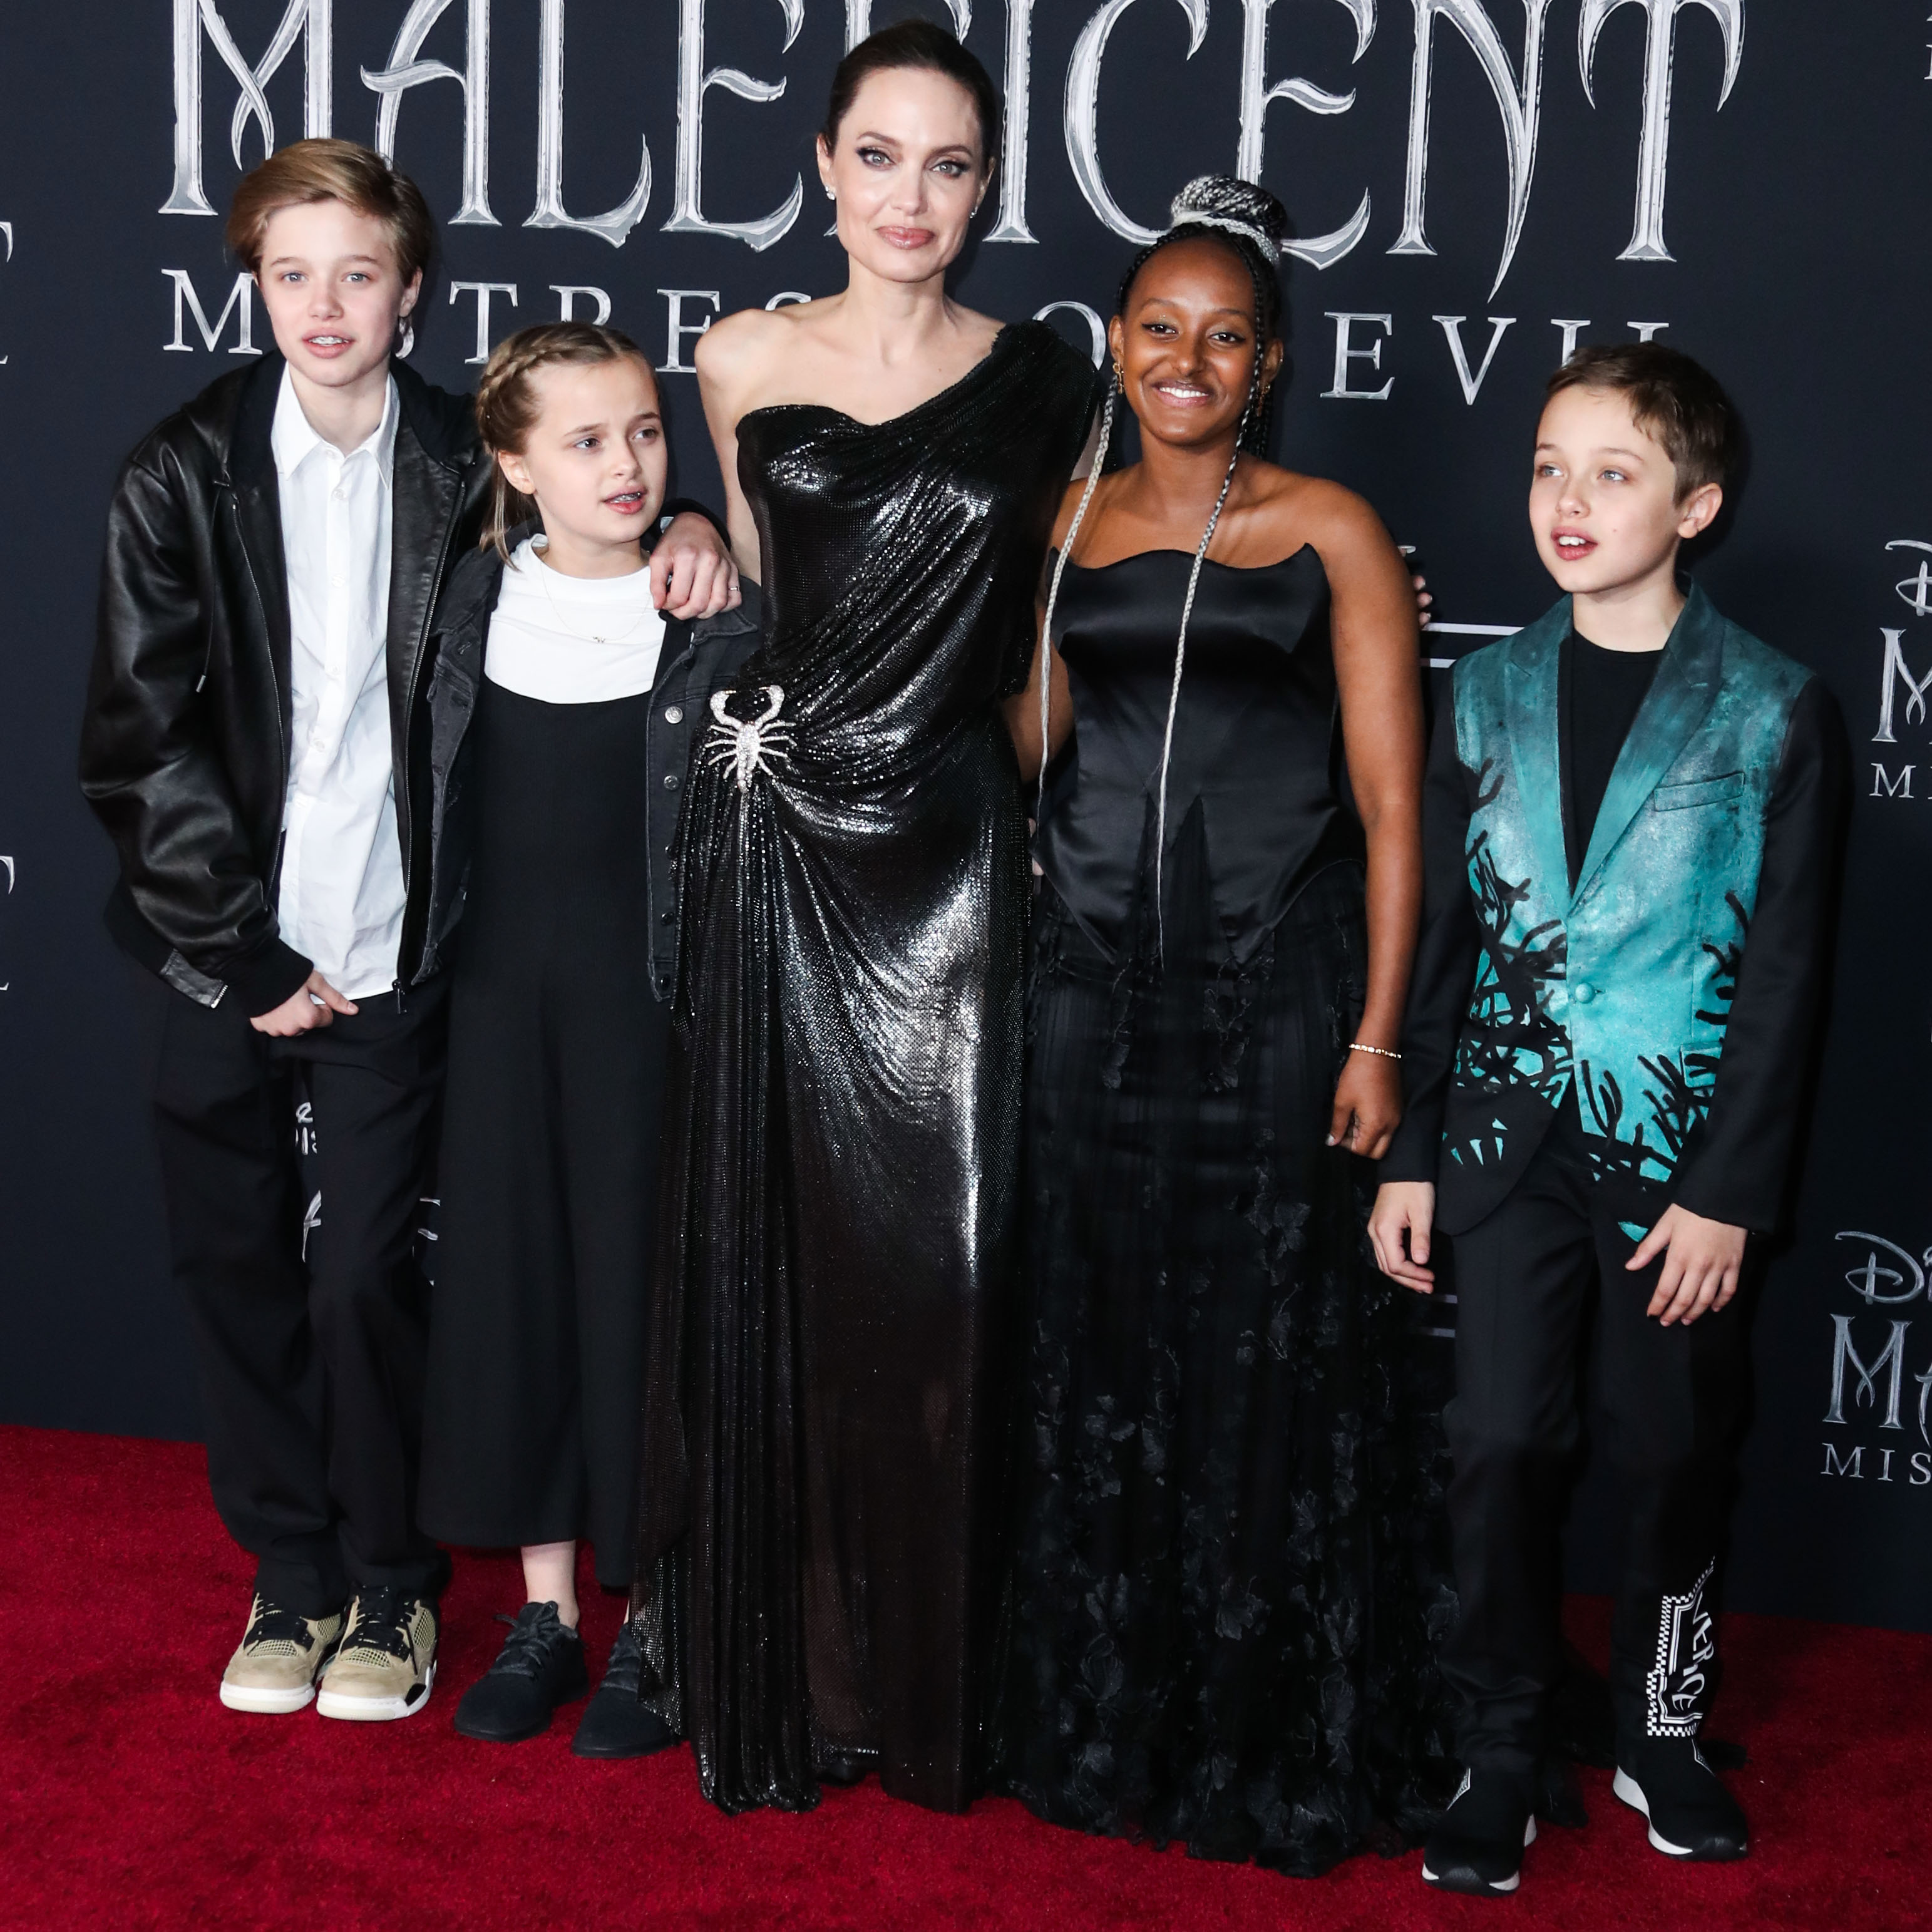 Angelina Jolie and family at the Maleficient Premiere